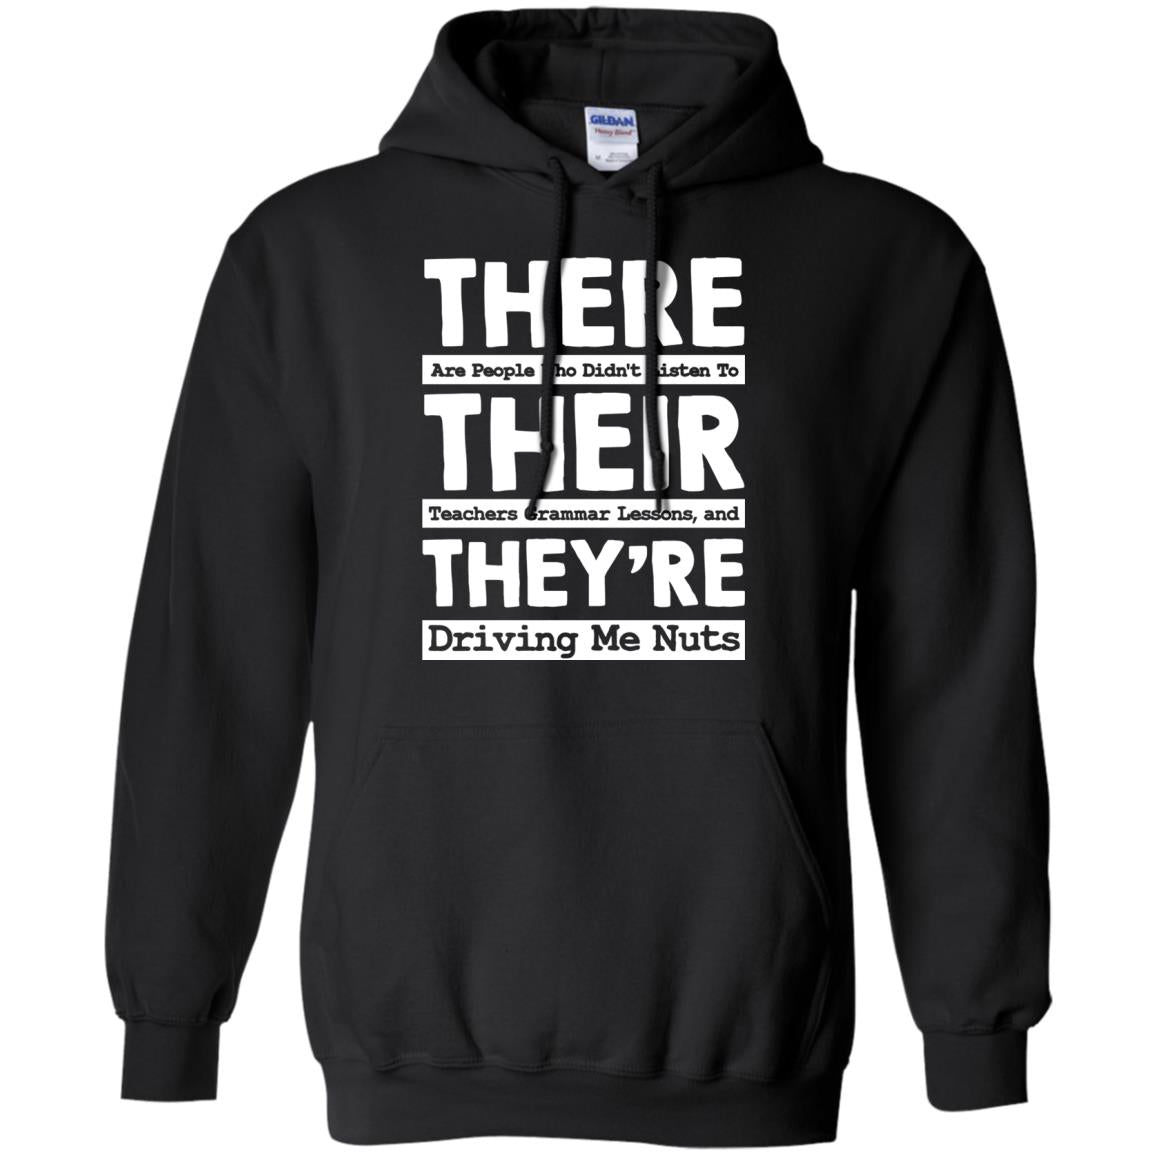 There Are People Who Didn't Listen To Their Teachers Grammar Lessons, And They're Driving Me Nuts TshirtG185 Gildan Pullover Hoodie 8 oz.